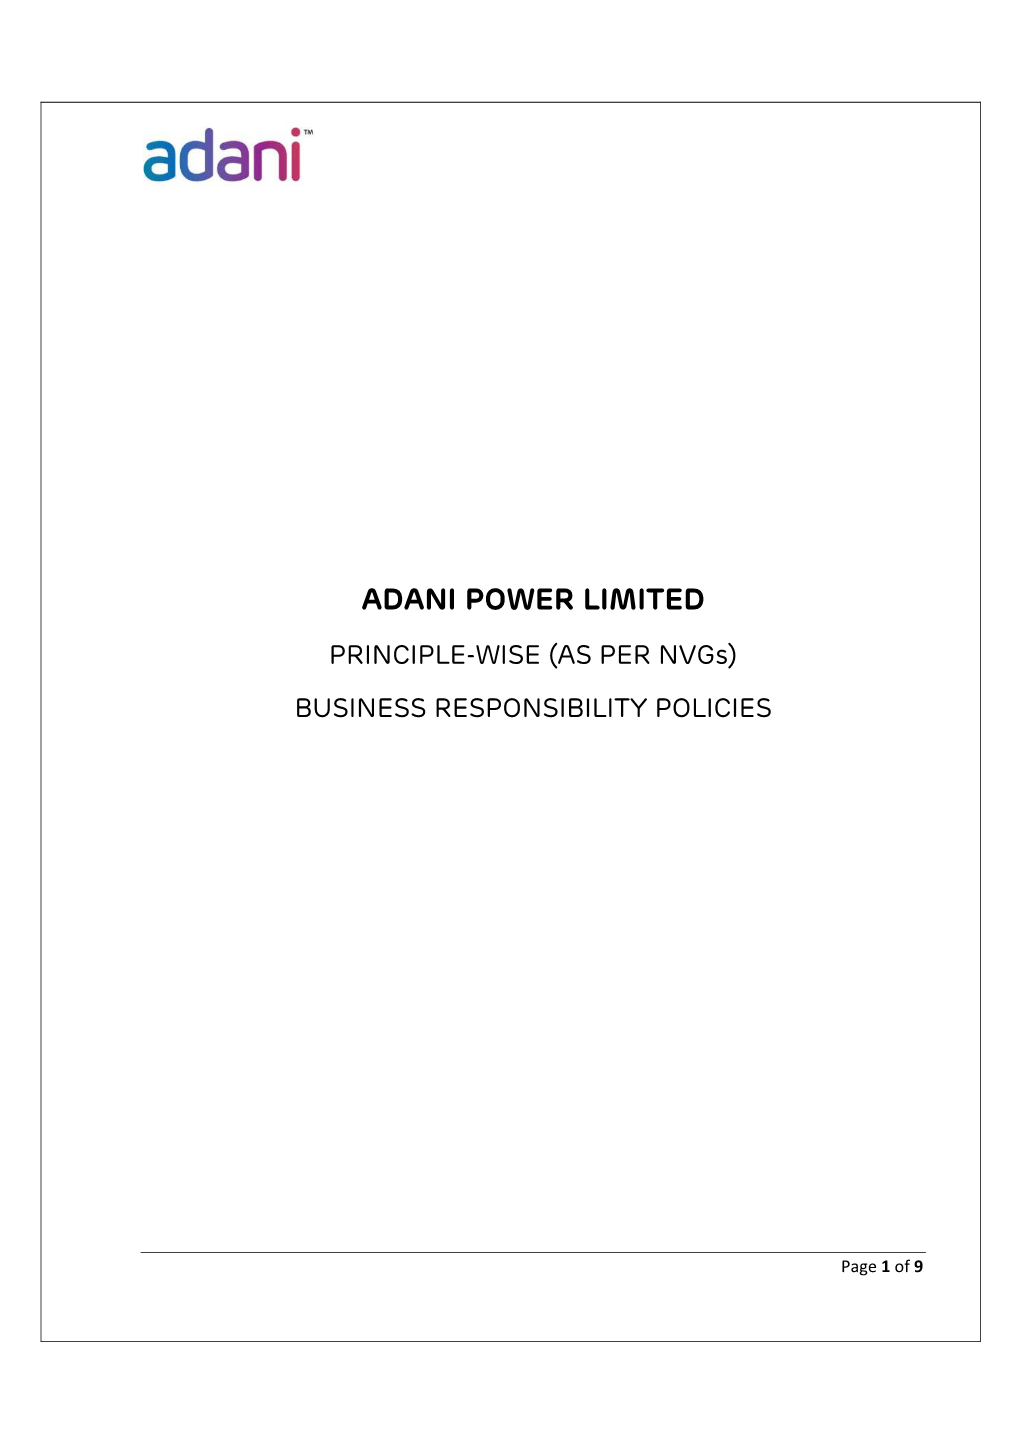 Business Responsibility Policies